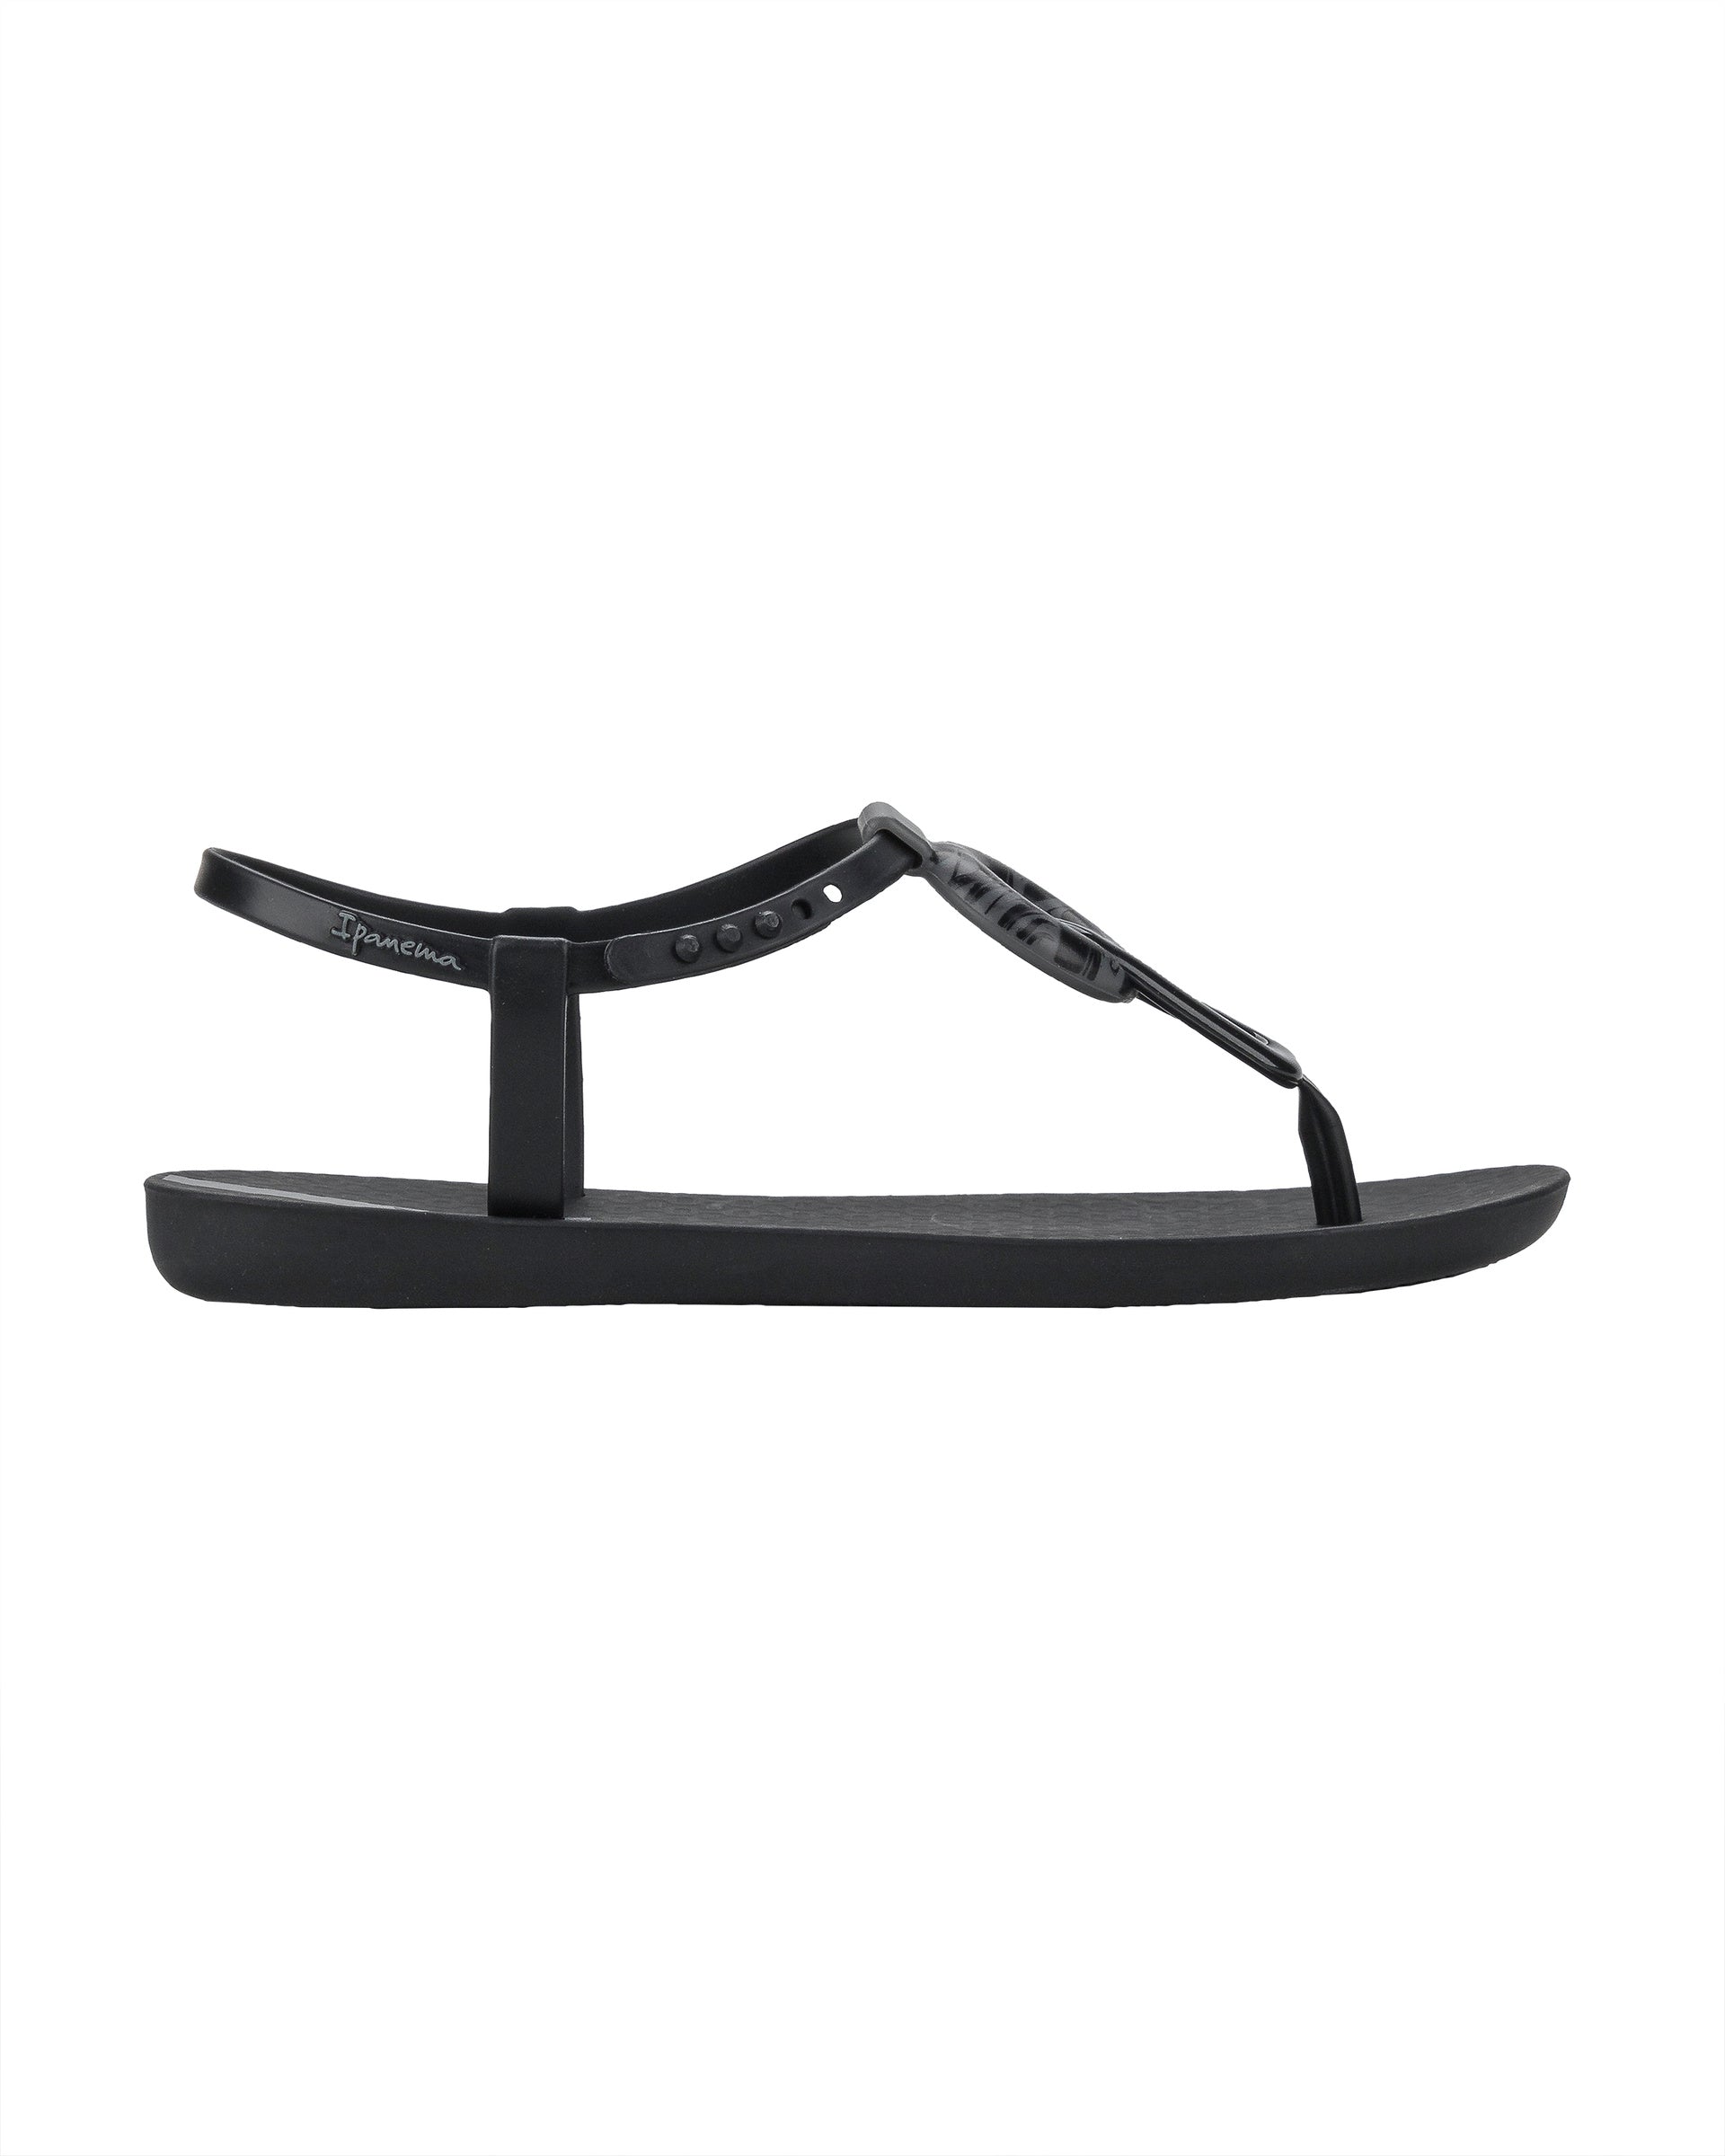 Outer side view of a black Ipanema Class Marble women's t-strap sandal.